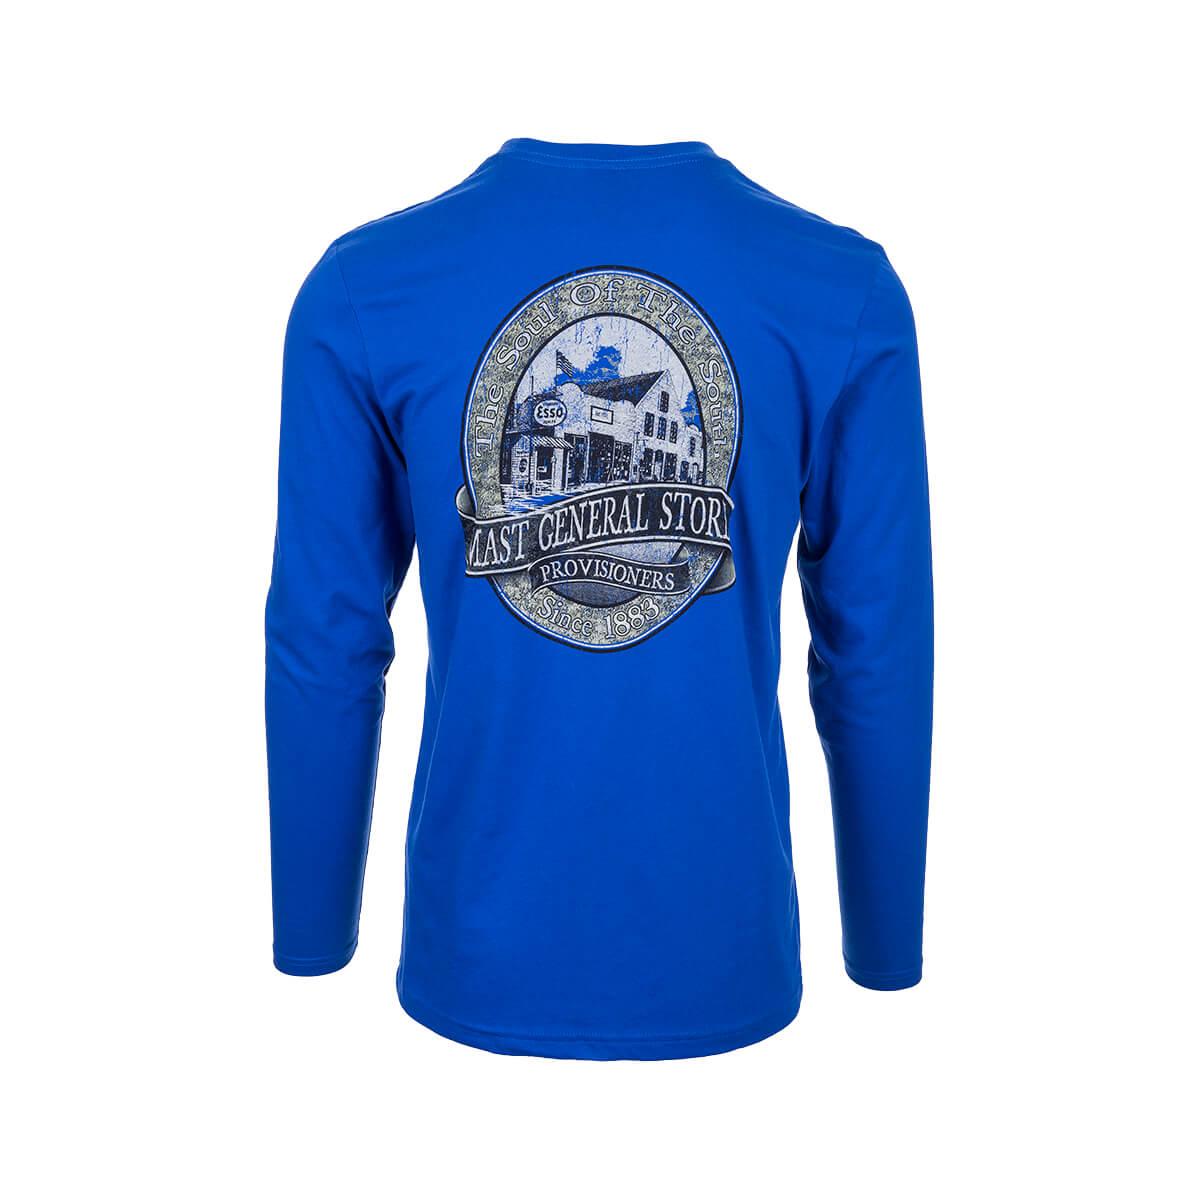  Mast General Store Soul Of The South Long Sleeve T- Shirt